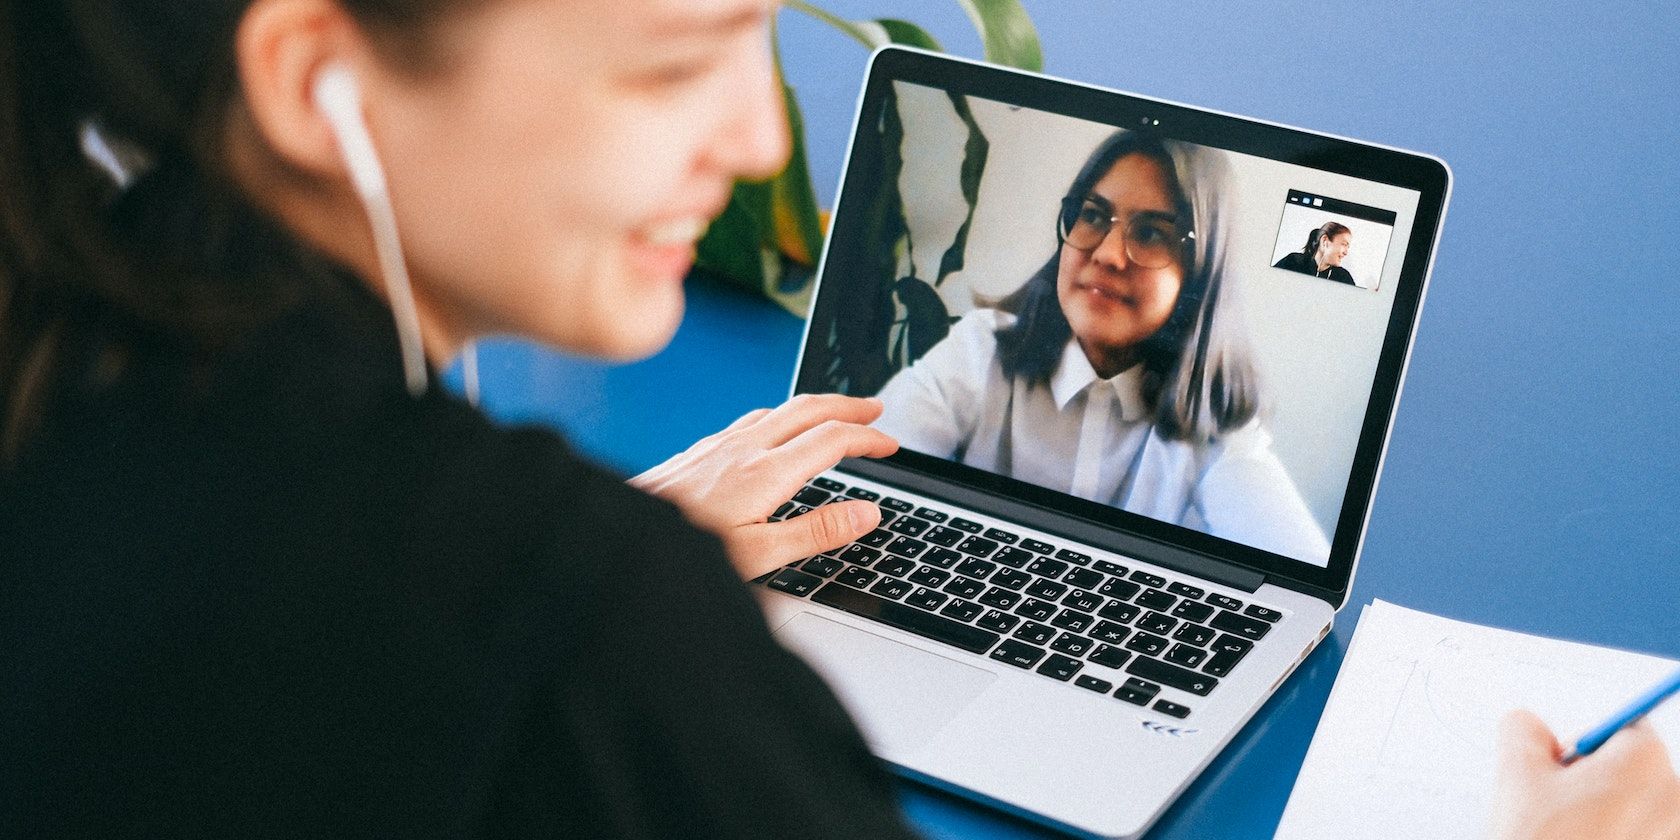 Woman on a laptop video call